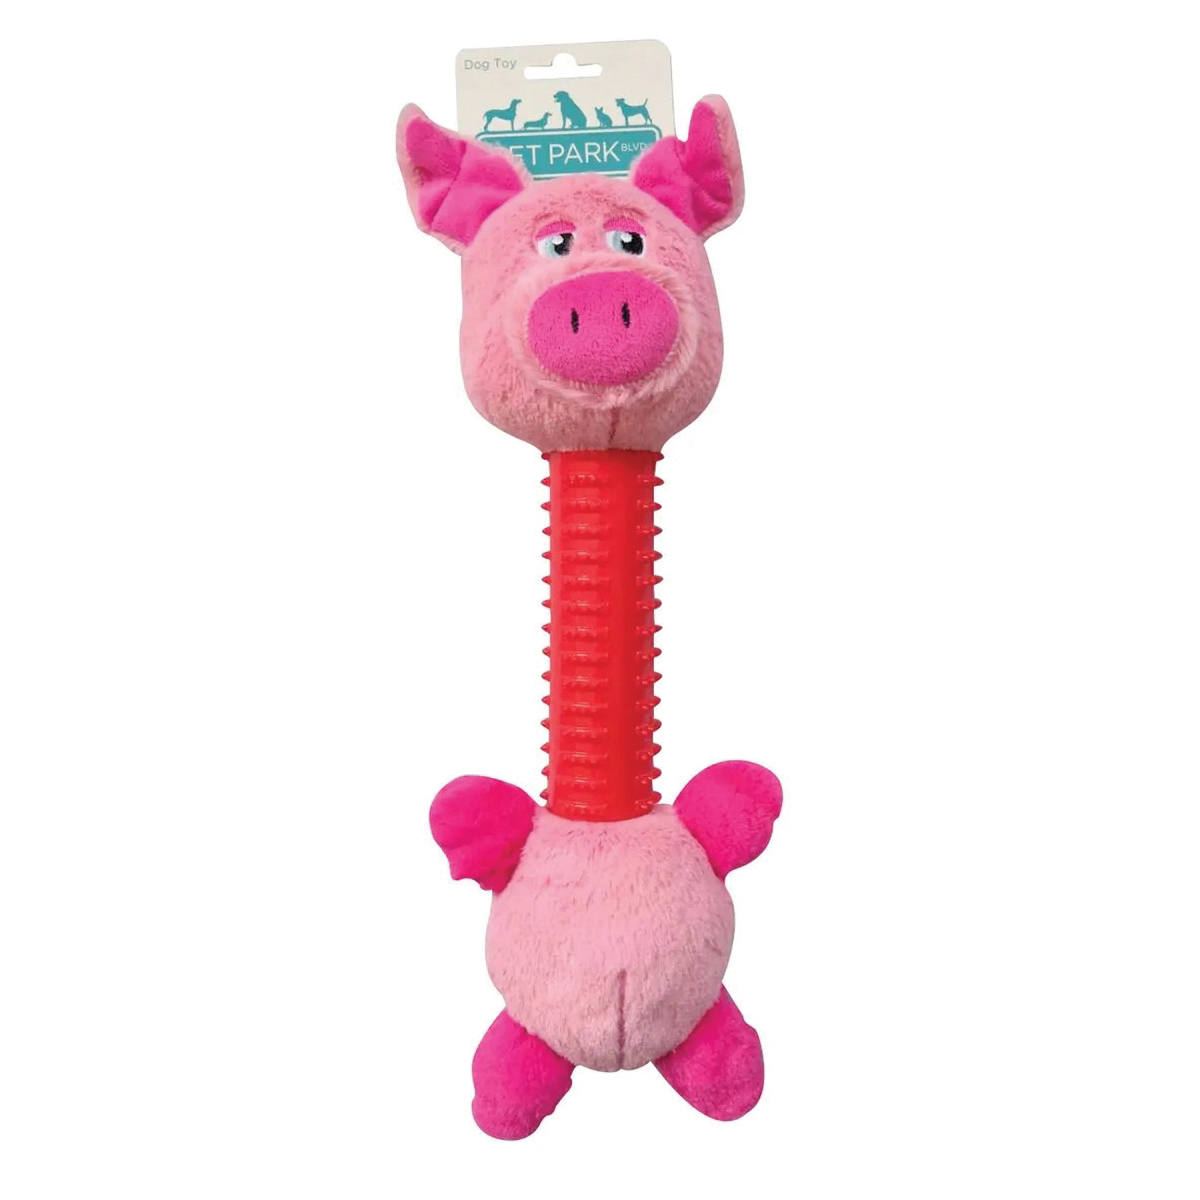 US2207 15 Dog Toy, Sillies Toy, Pig